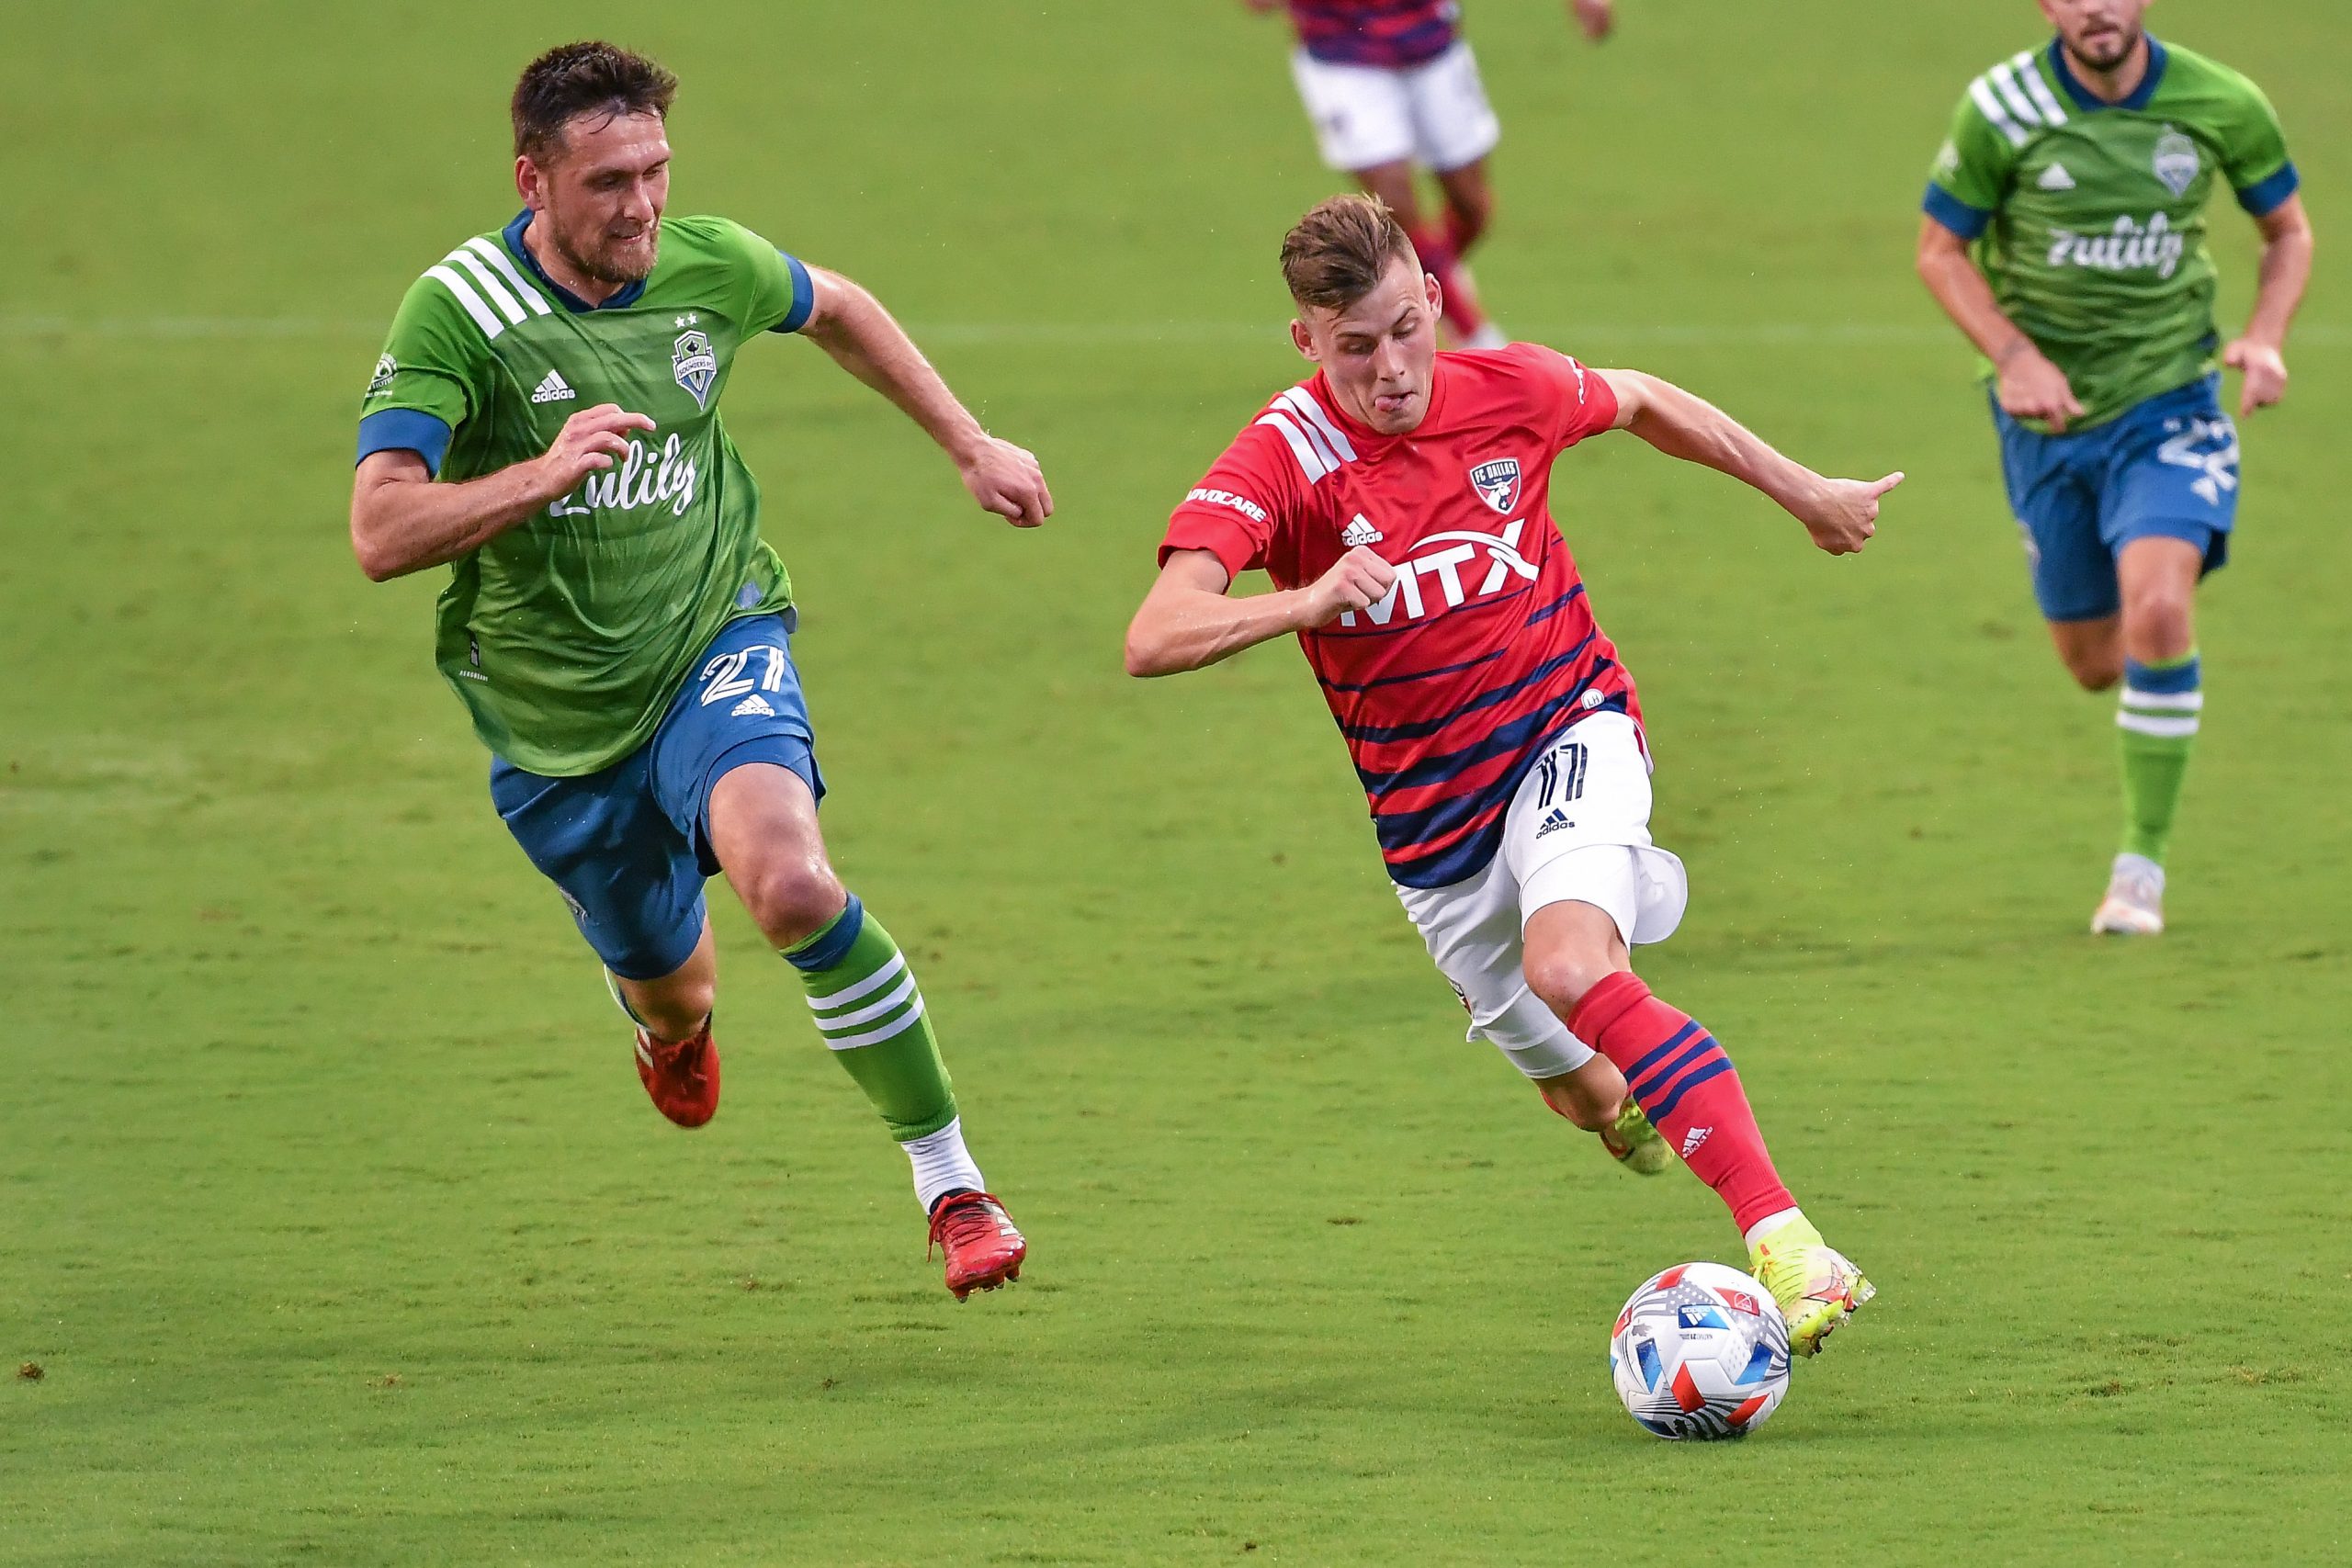 in the MLS match between FC Dallas and Seattle Sounders, August 18, 2021.